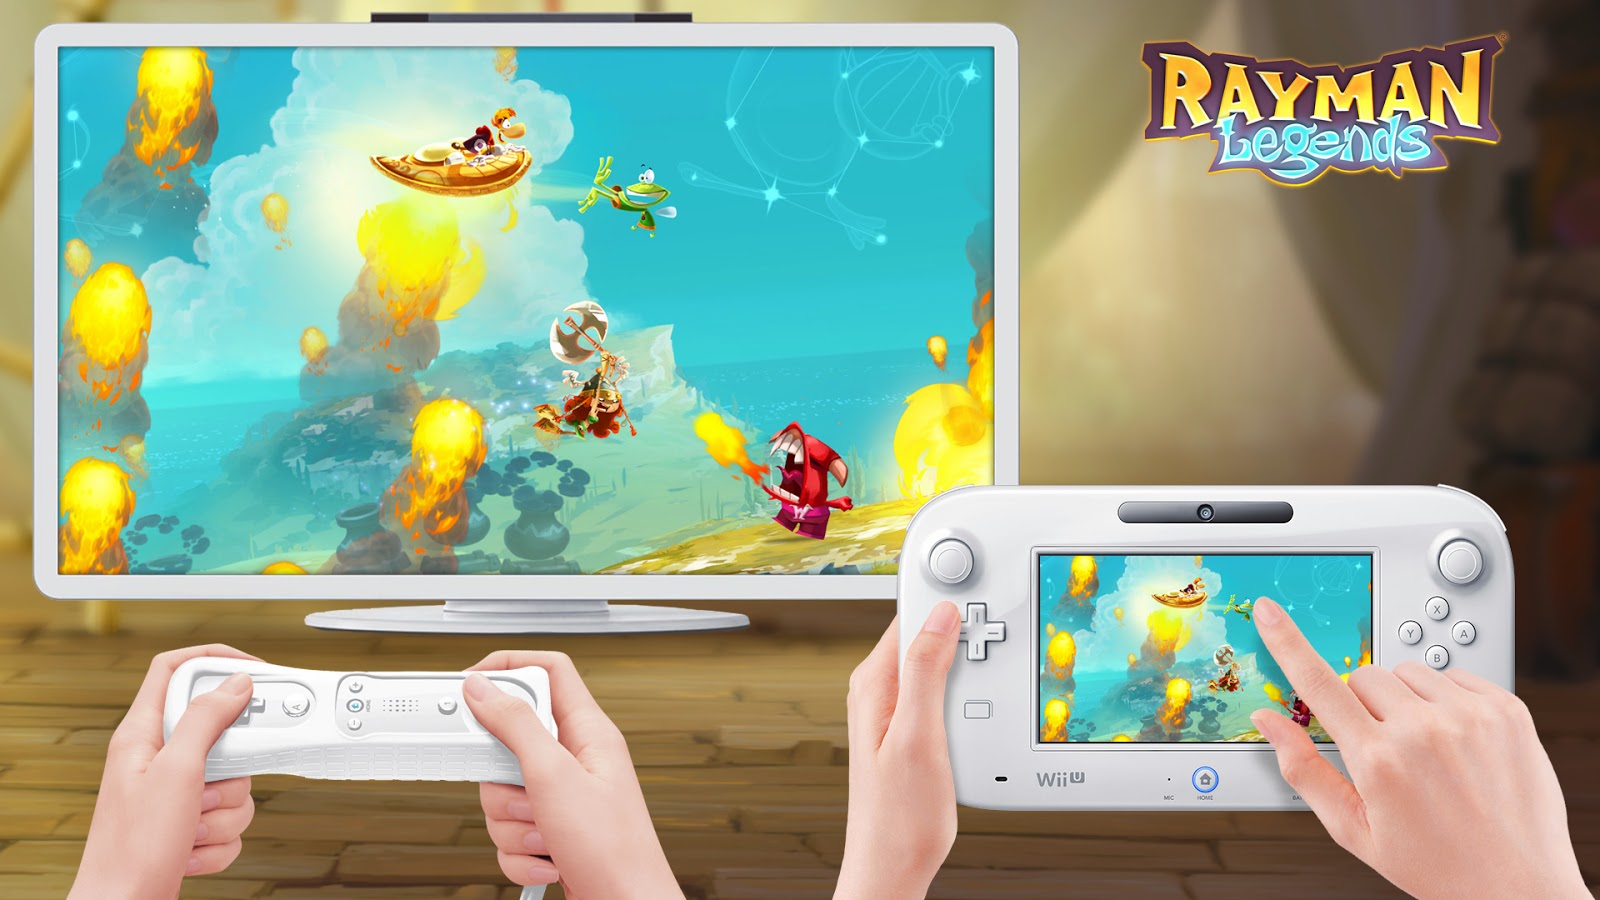 Finally, Some Games That Actually Use the Wii U's GamePad - Vox